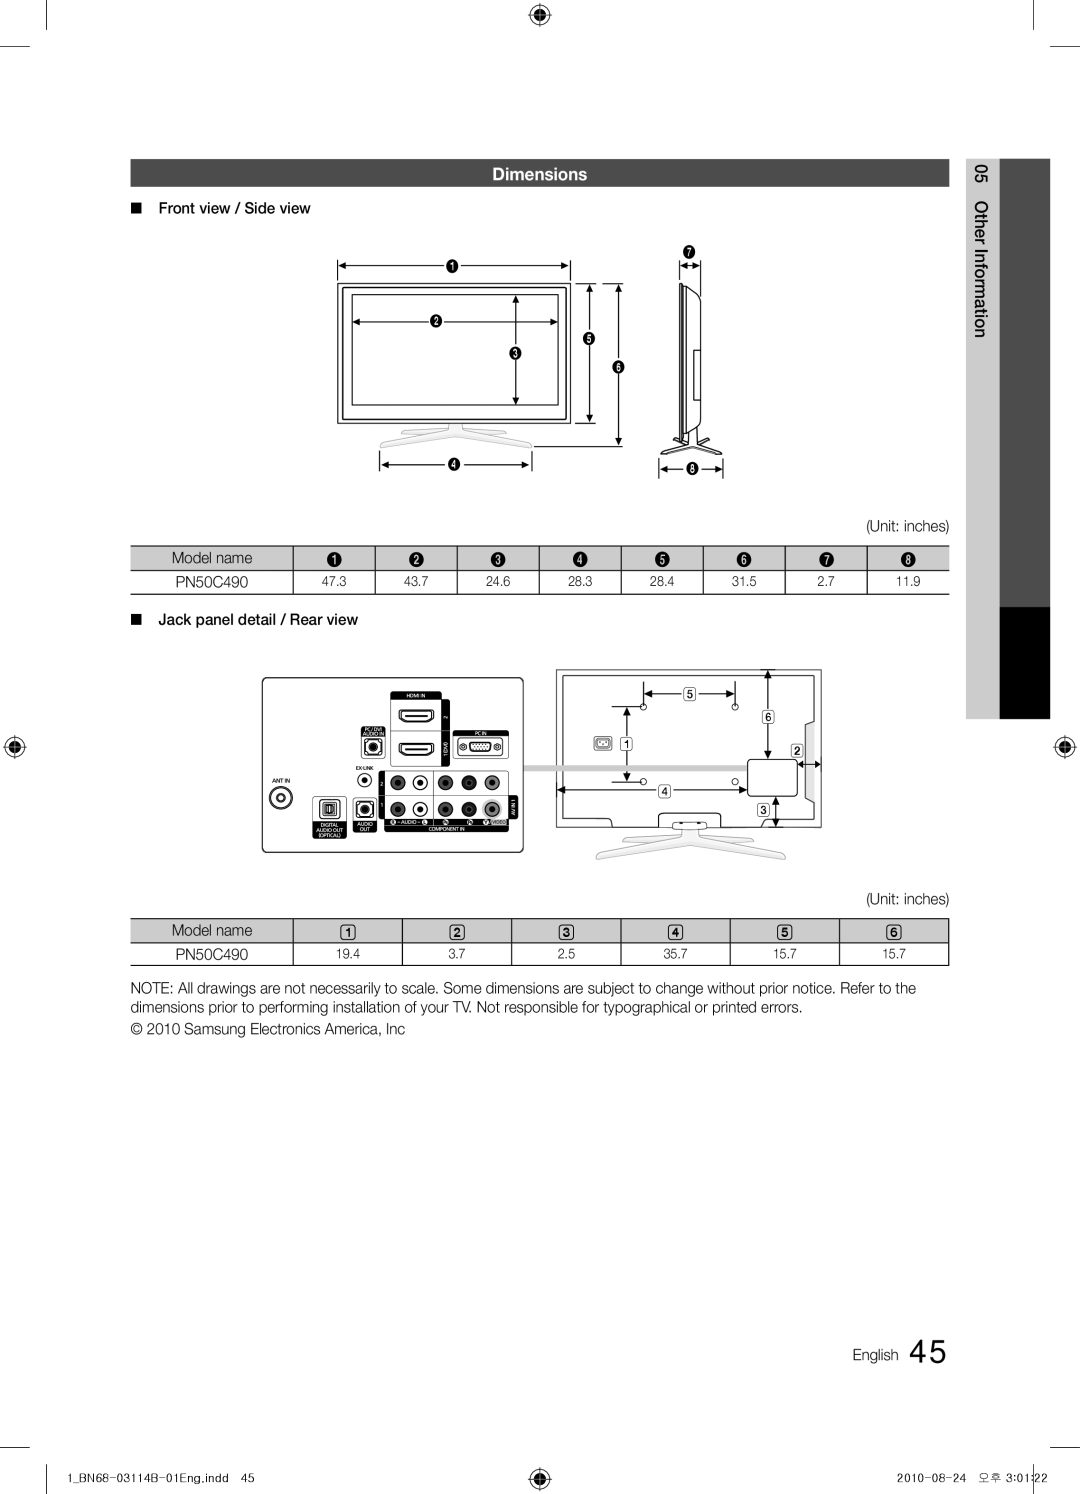 Samsung BN68-03114B-01 Dimensions, Front view / Side view, Jack panel detail / Rear view, Other Information, Model name 